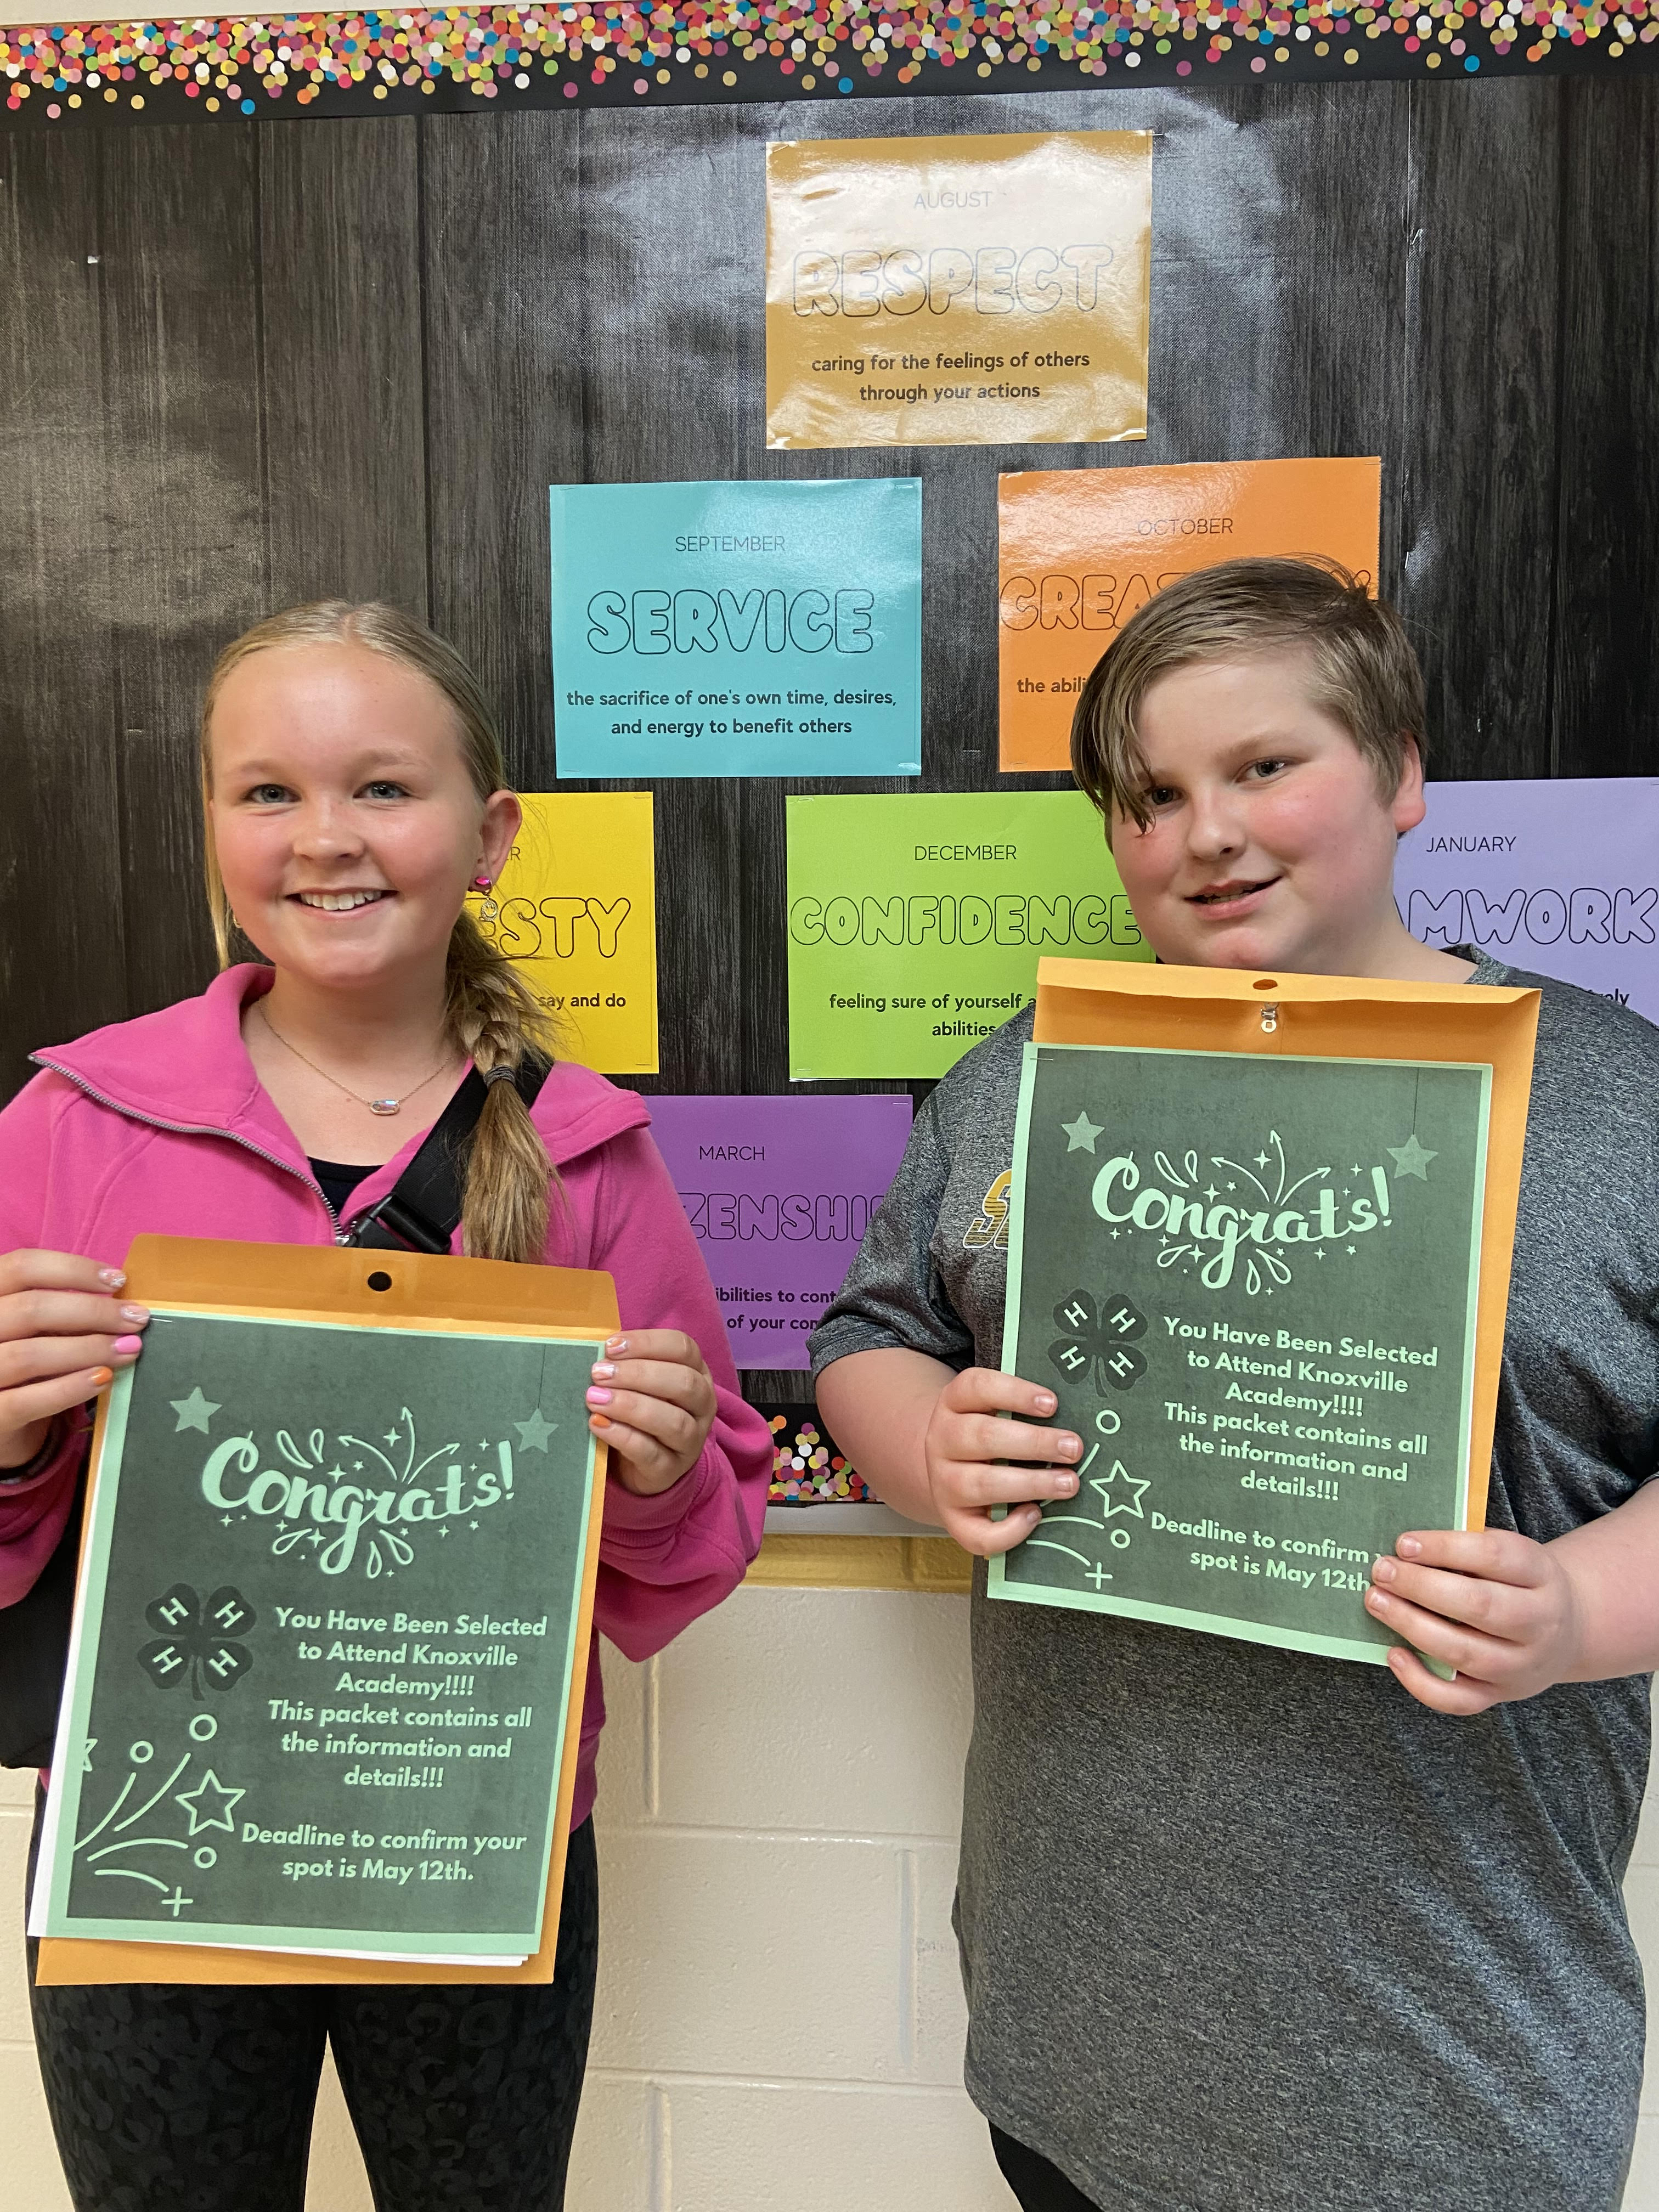 Anna Claire Kelley and James Arnold were selected to attend the 4-H Knoxville Academy this summer! This is a huge accomplishment and we are so excited for them!